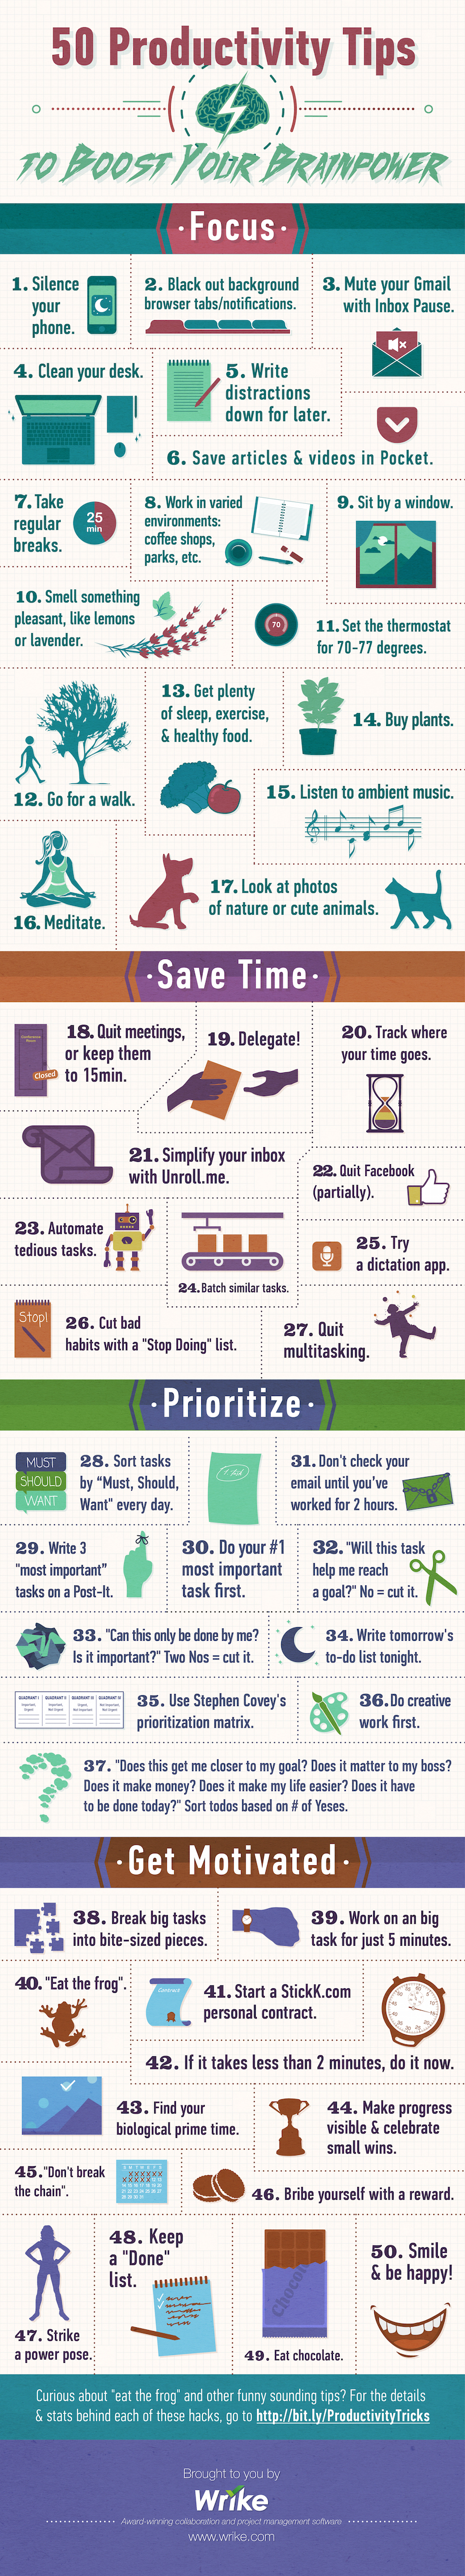 50 Productivity Tips to Boost Your Brainpower (#Infographic)